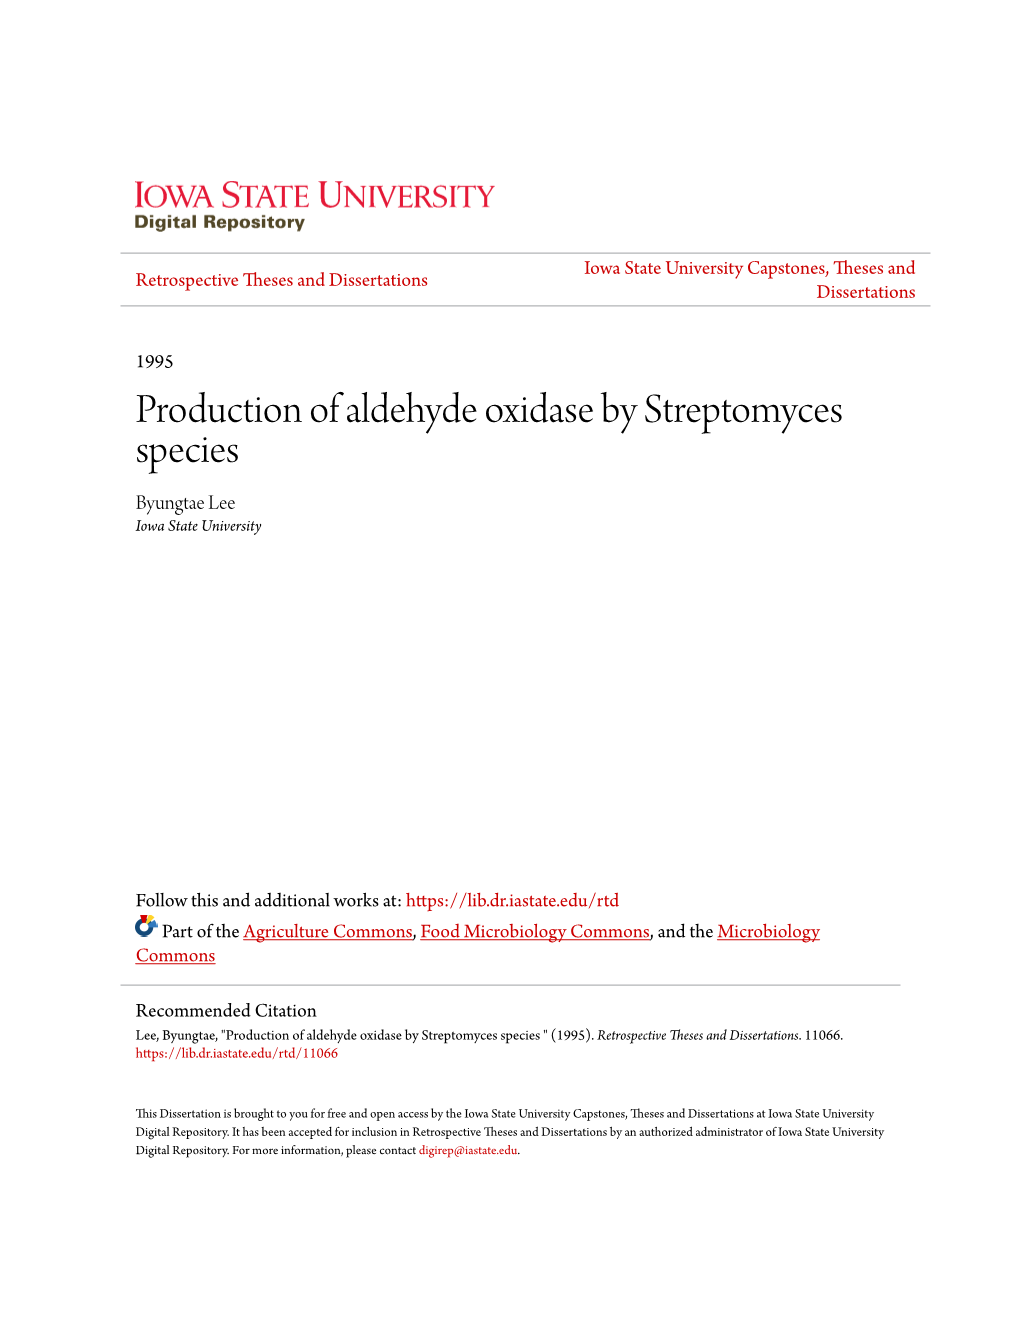 Production of Aldehyde Oxidase by Streptomyces Species Byungtae Lee Iowa State University